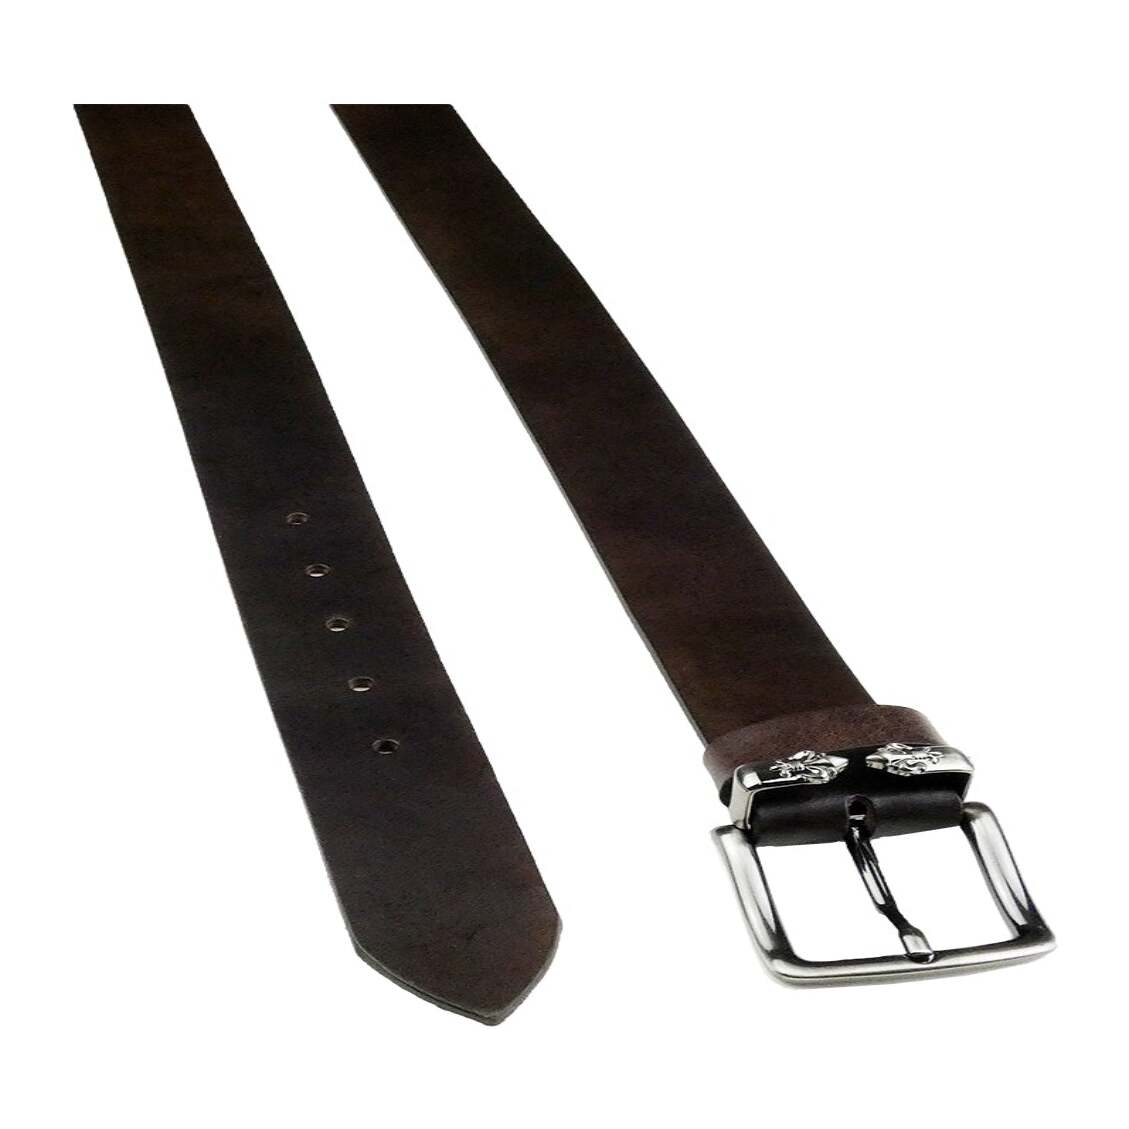 Gigli leather belt, handcrafted made in Italy